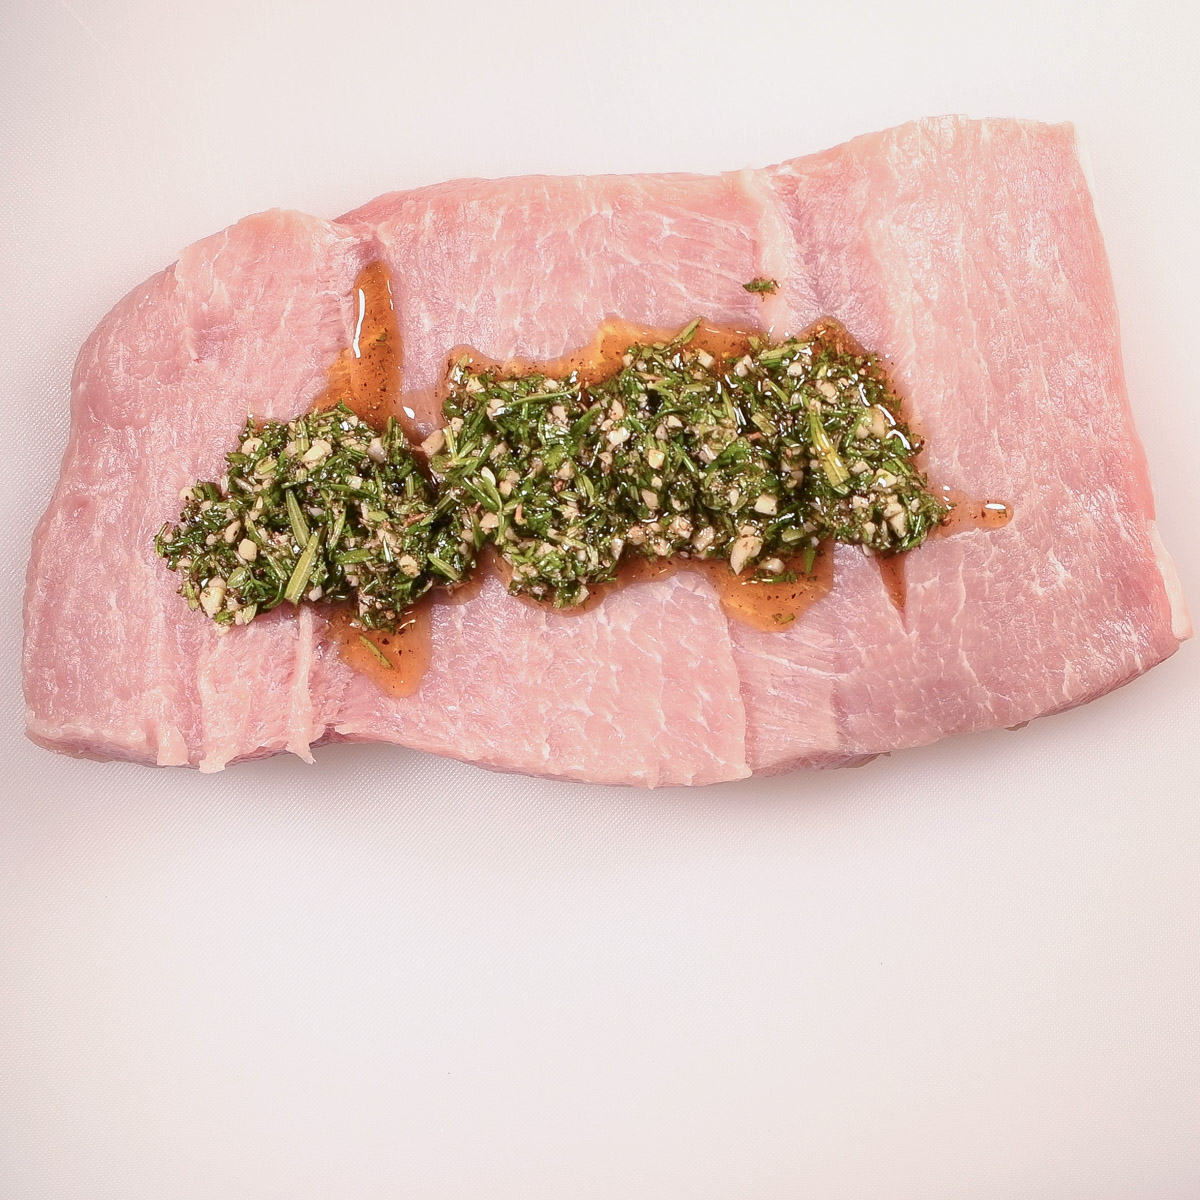 Add the herb mixture to the center of the butterflied pork loin.